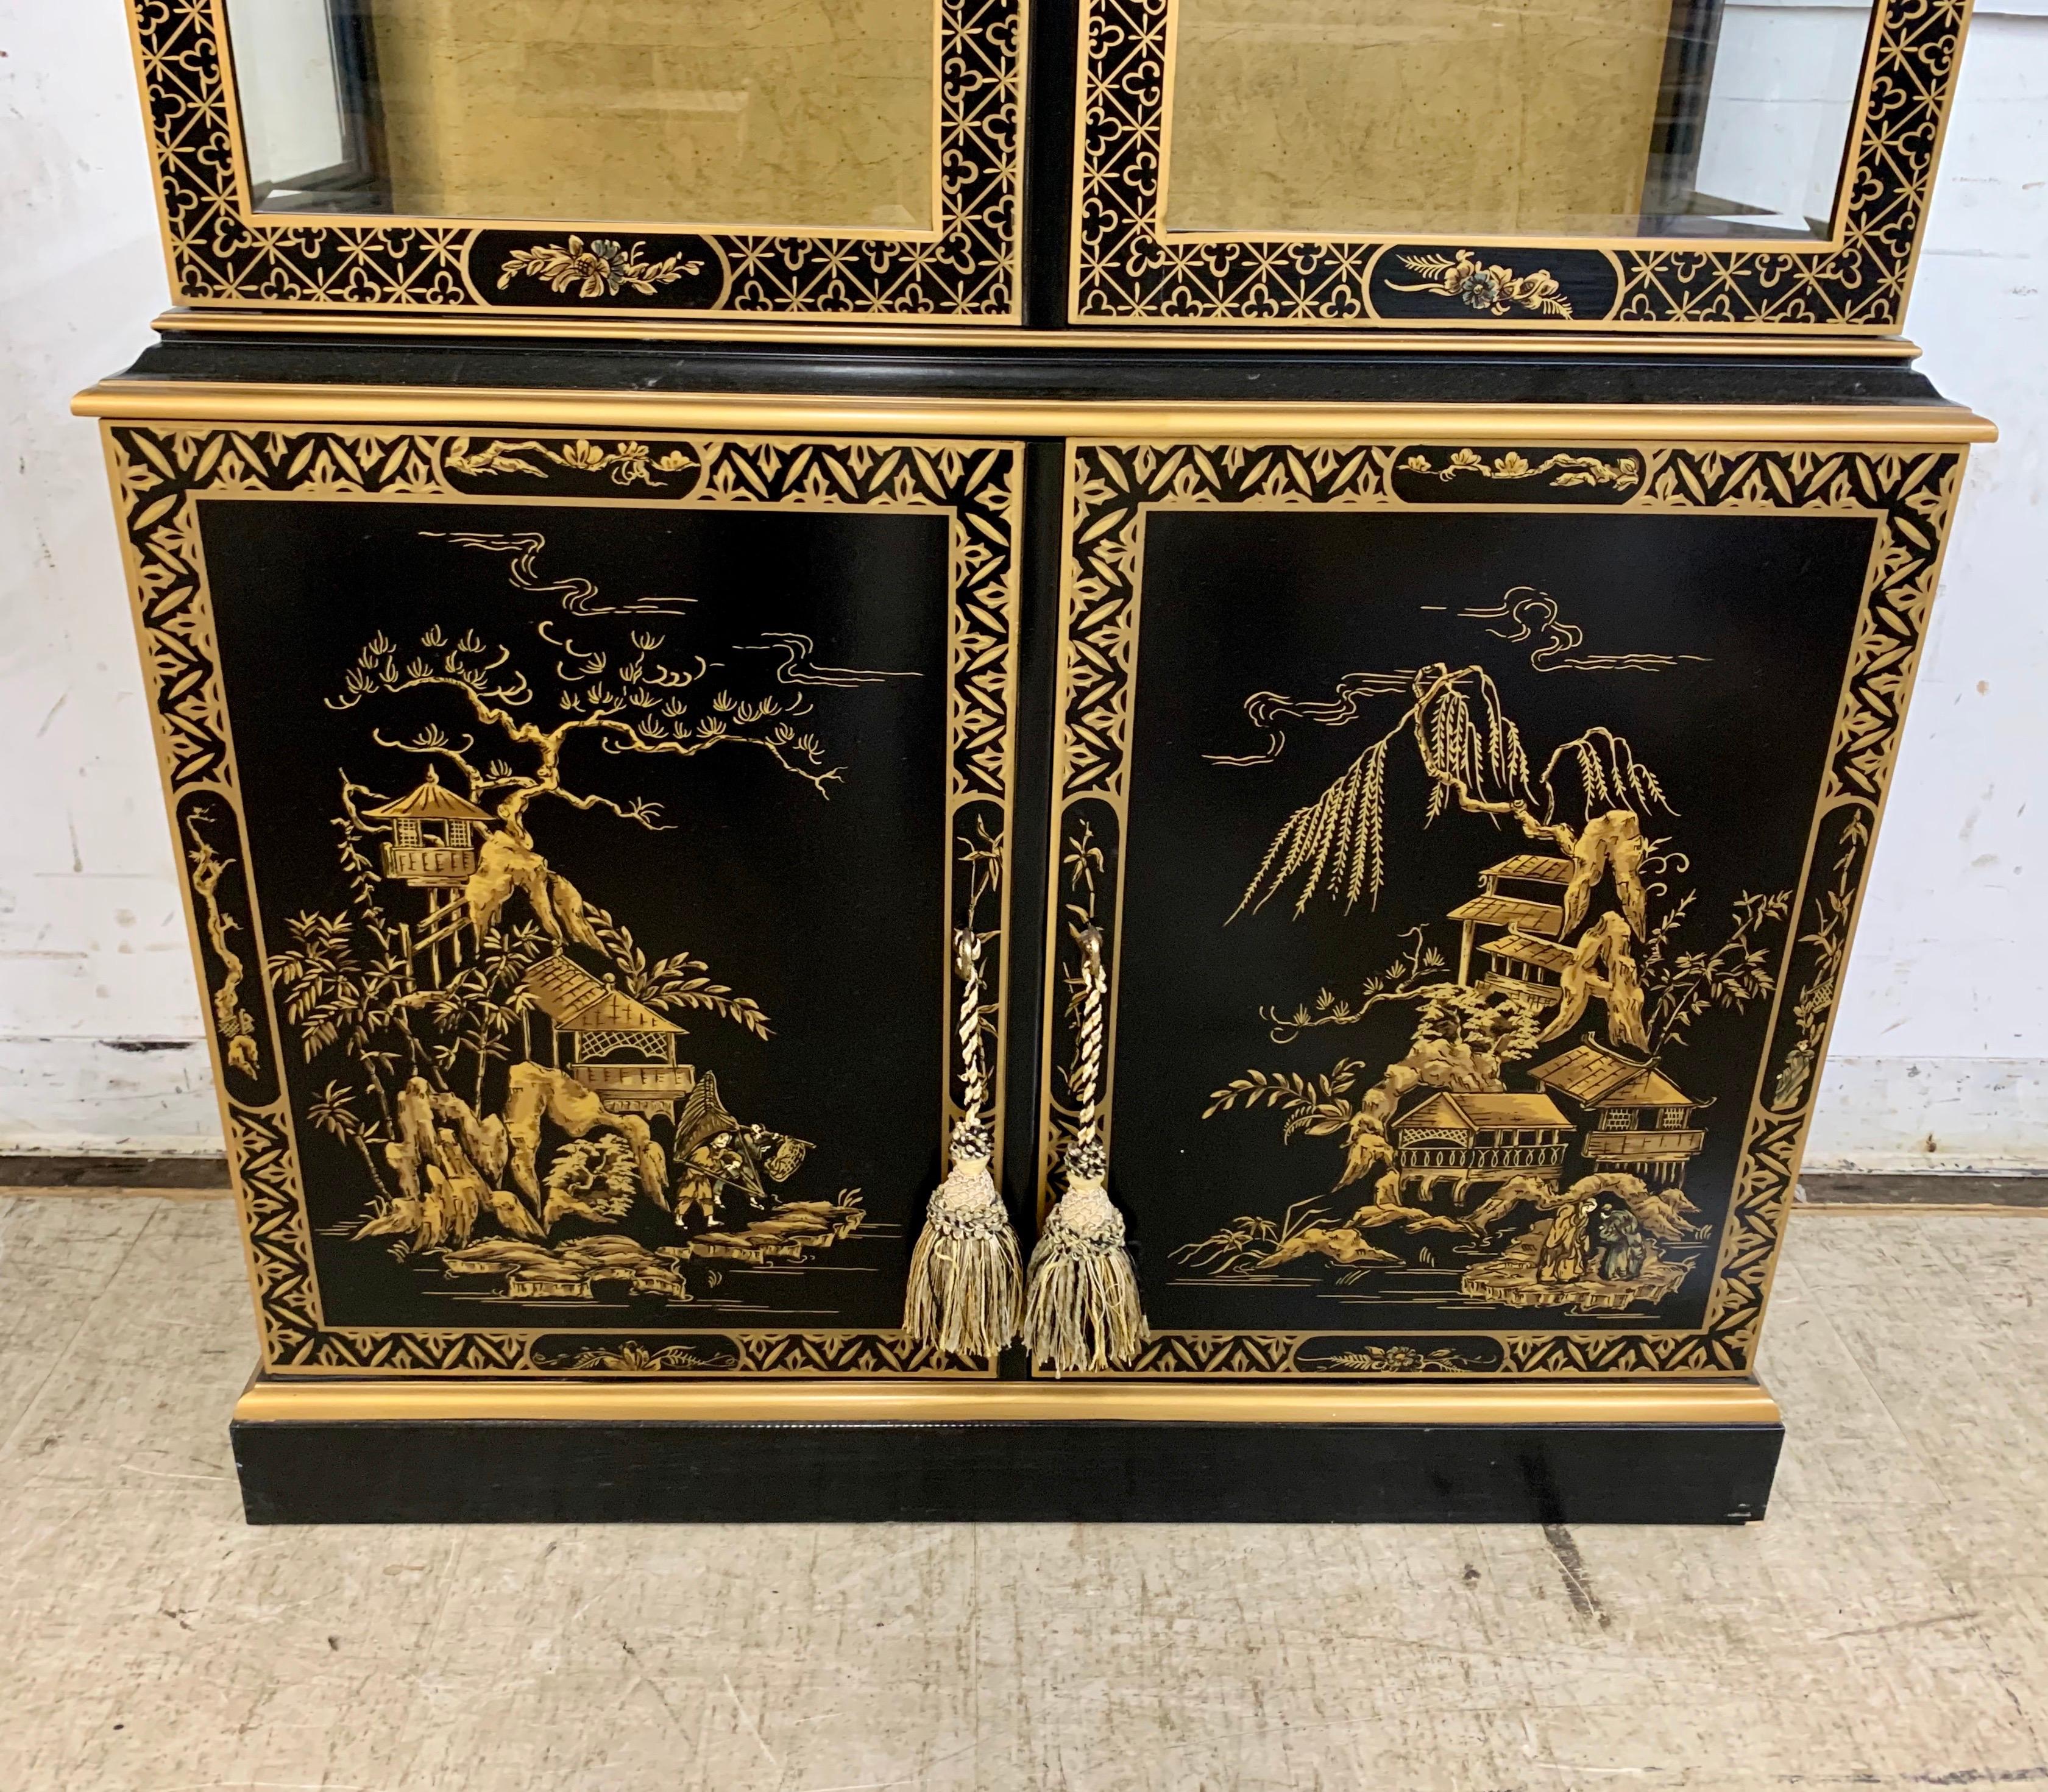 Black lacquered china cabinet by Drexel in Chinese chinoiserie style features hand painted gold scenery on three sides. It has lighted interior with glass shelves. Very good condition with only very minor imperfections consistent with age.